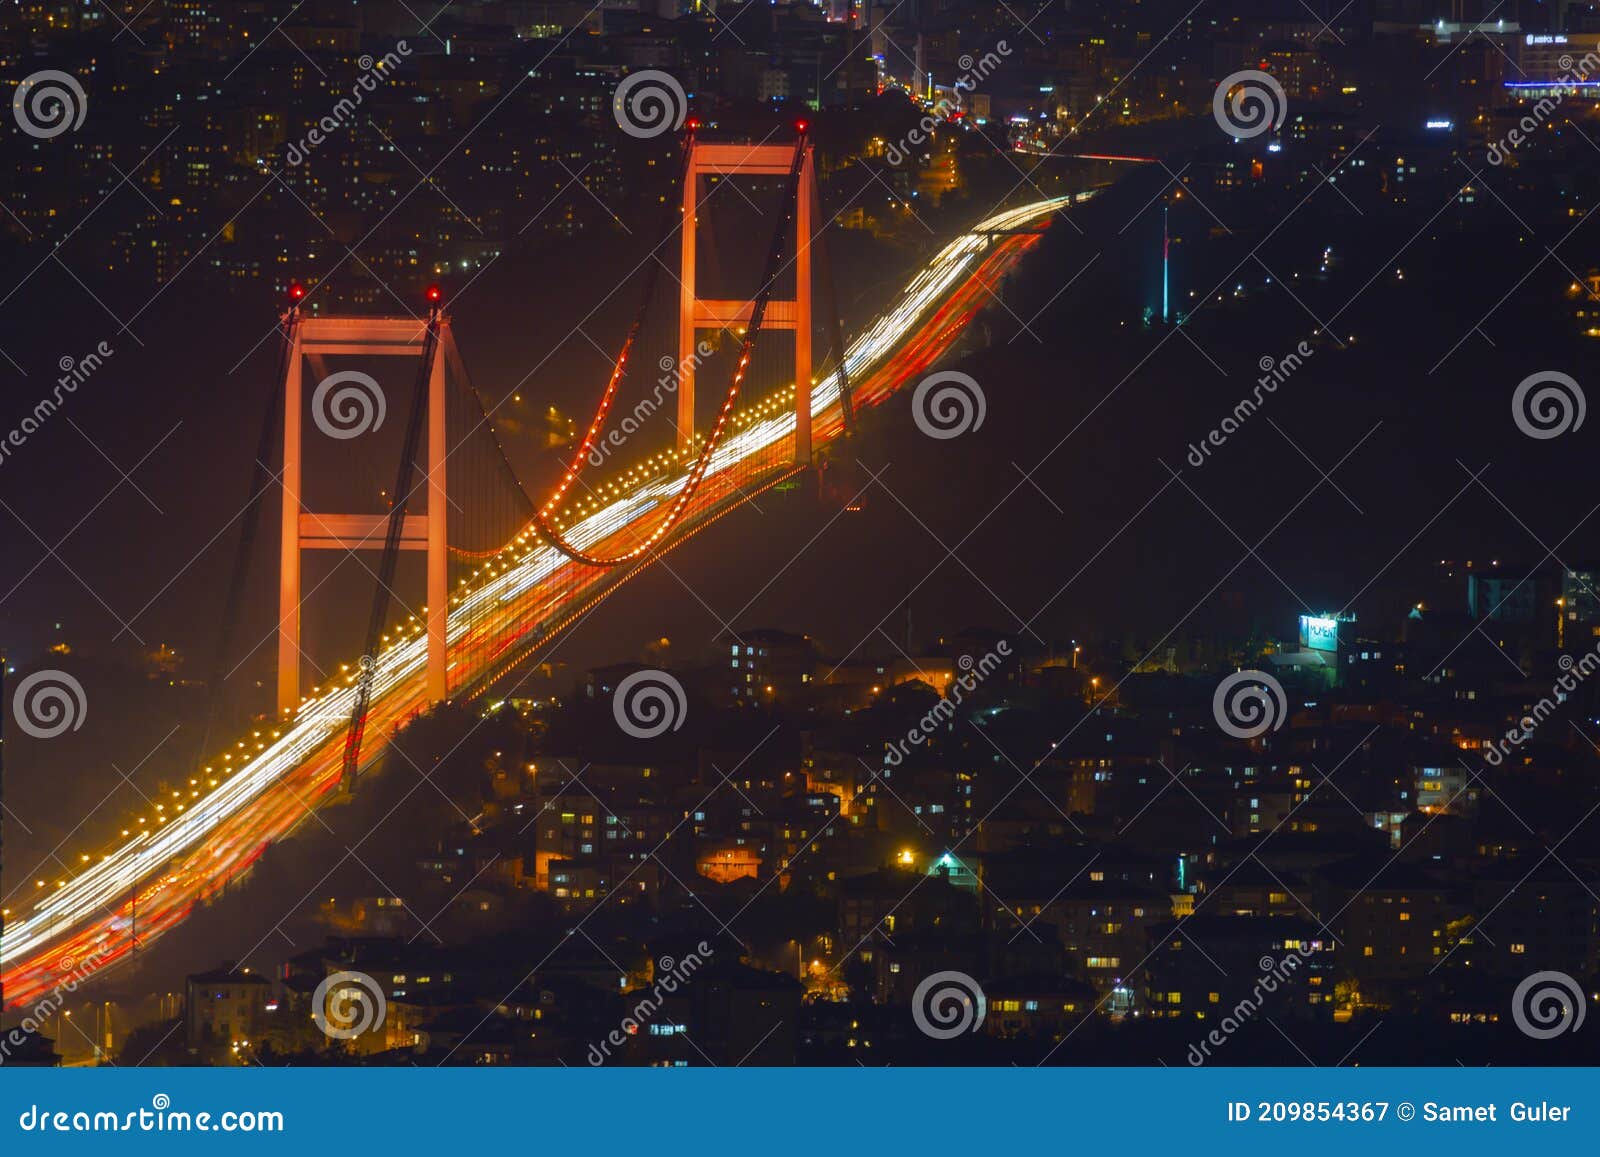 istanbul night aerial view, tall buildings and plazas.